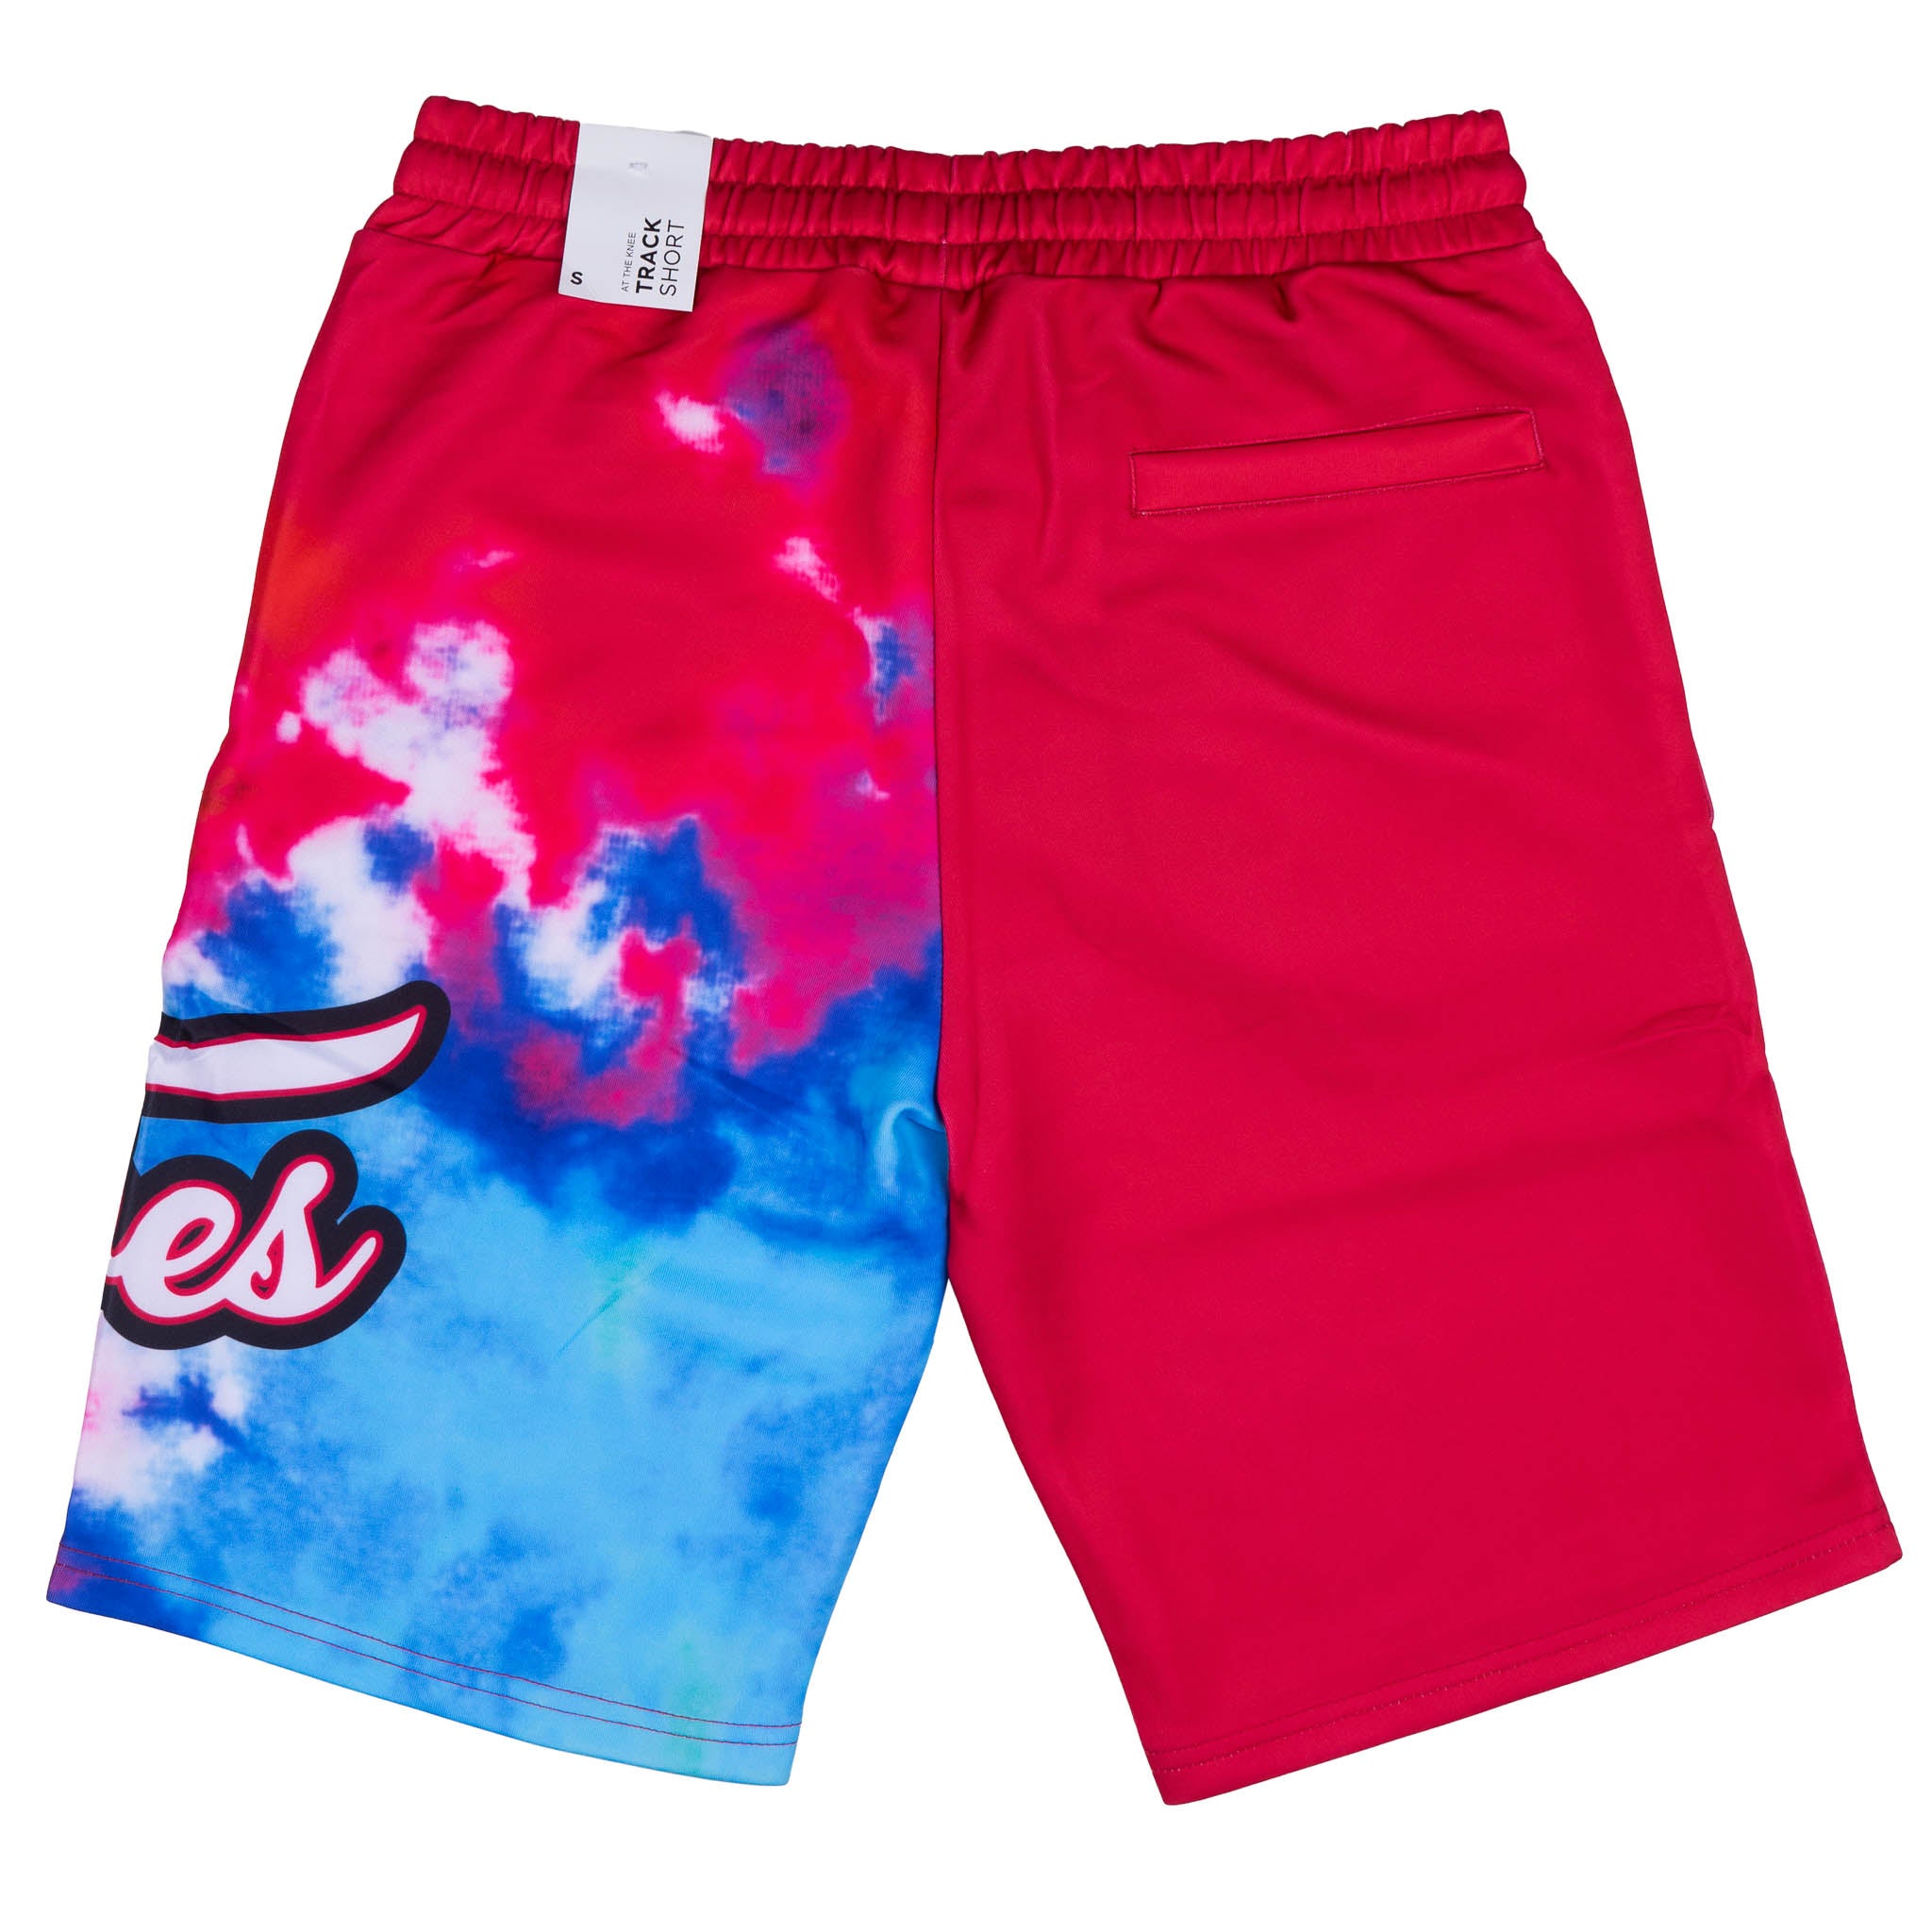 RUE21 TRACK SHORTS RED - 521911